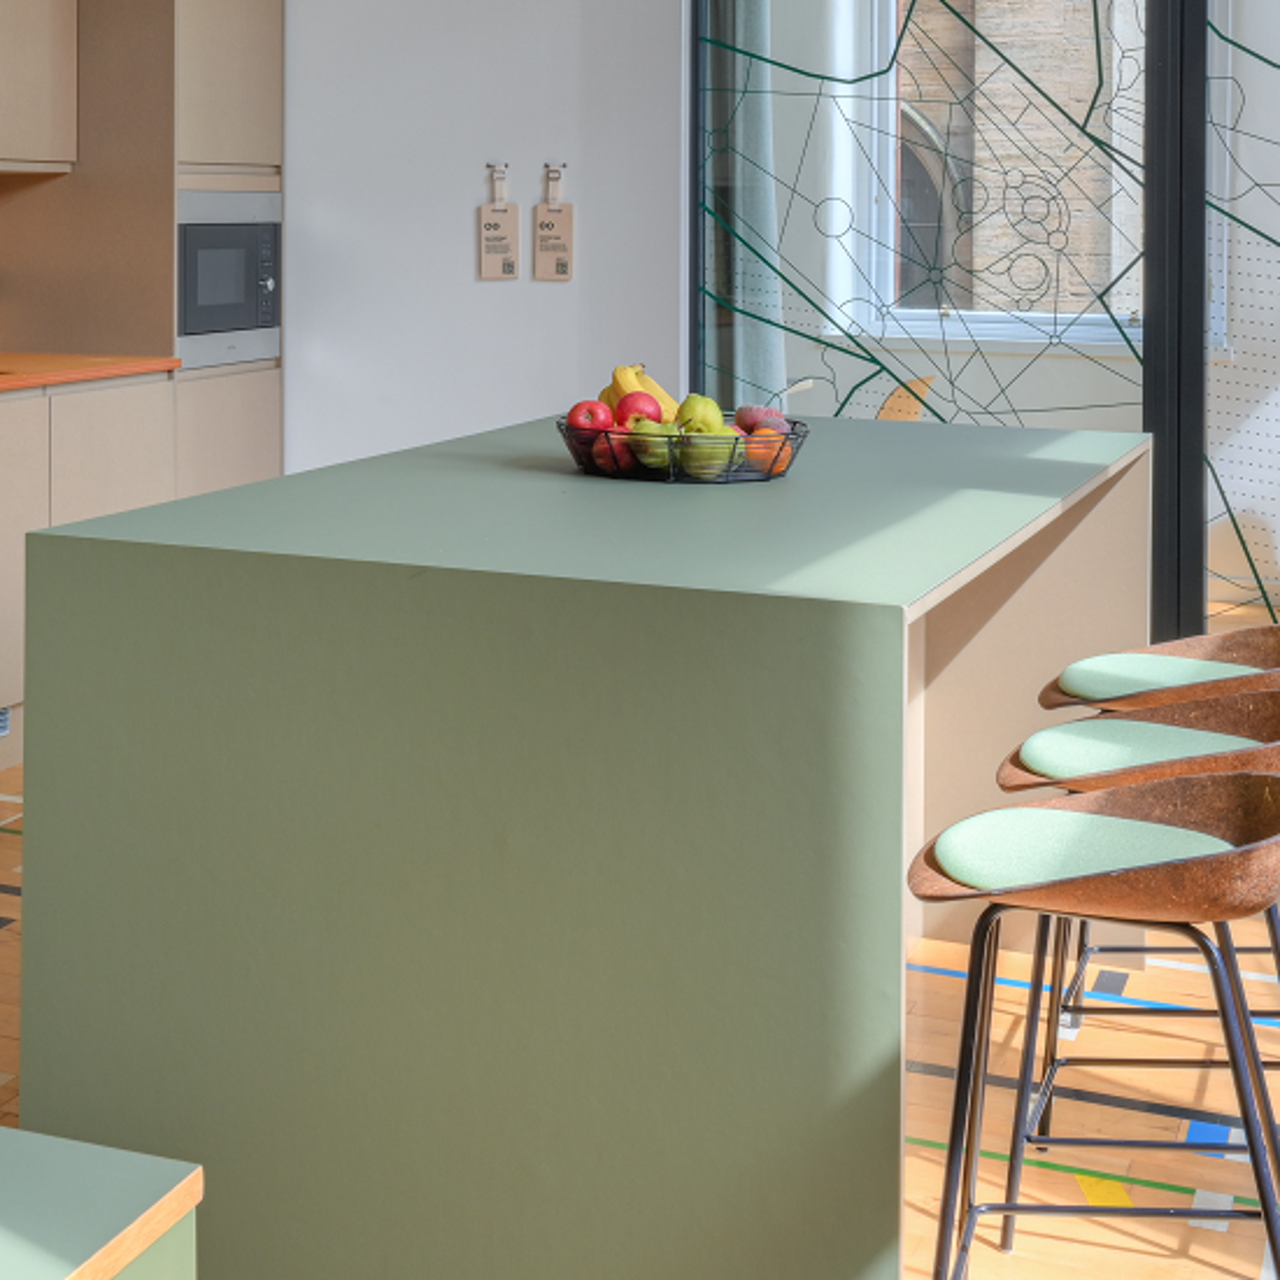 Green kitchen counter with green stools and fruit bowl